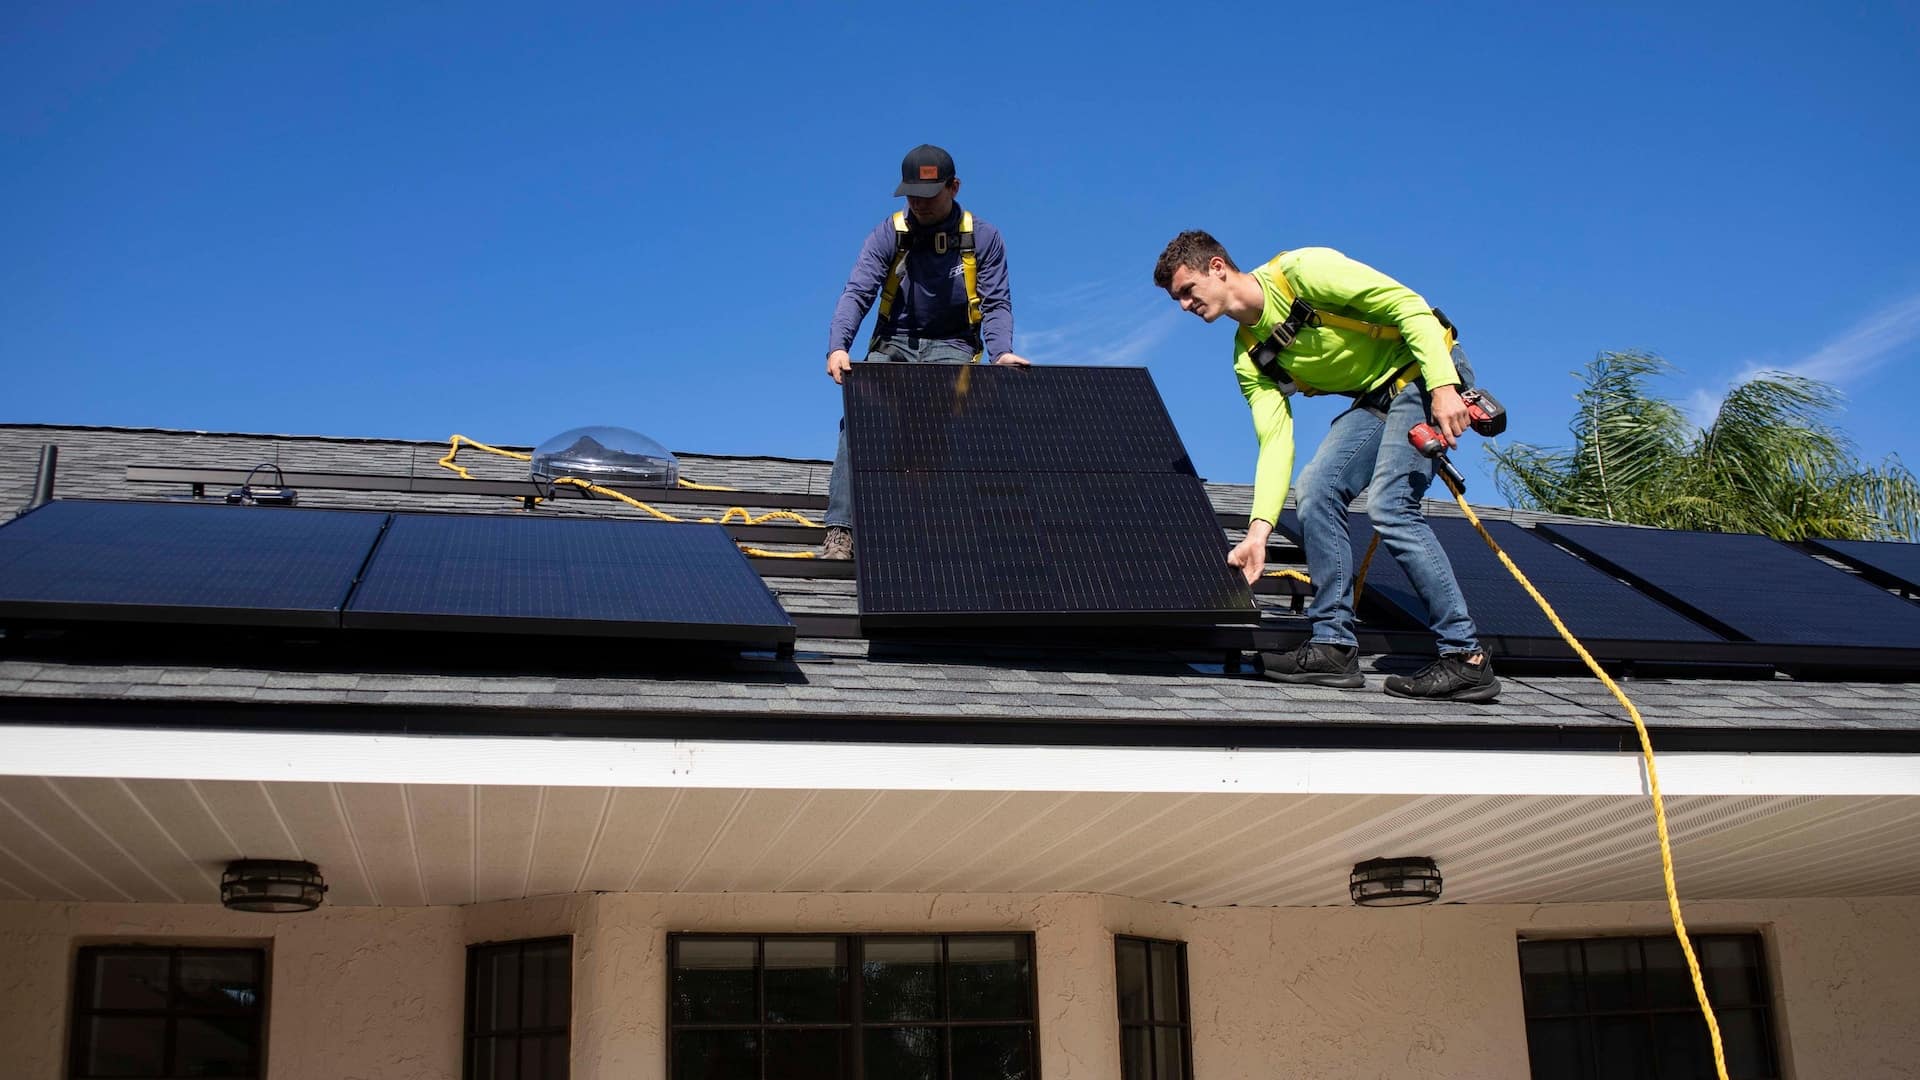 Two men starting on a solar panel installation.